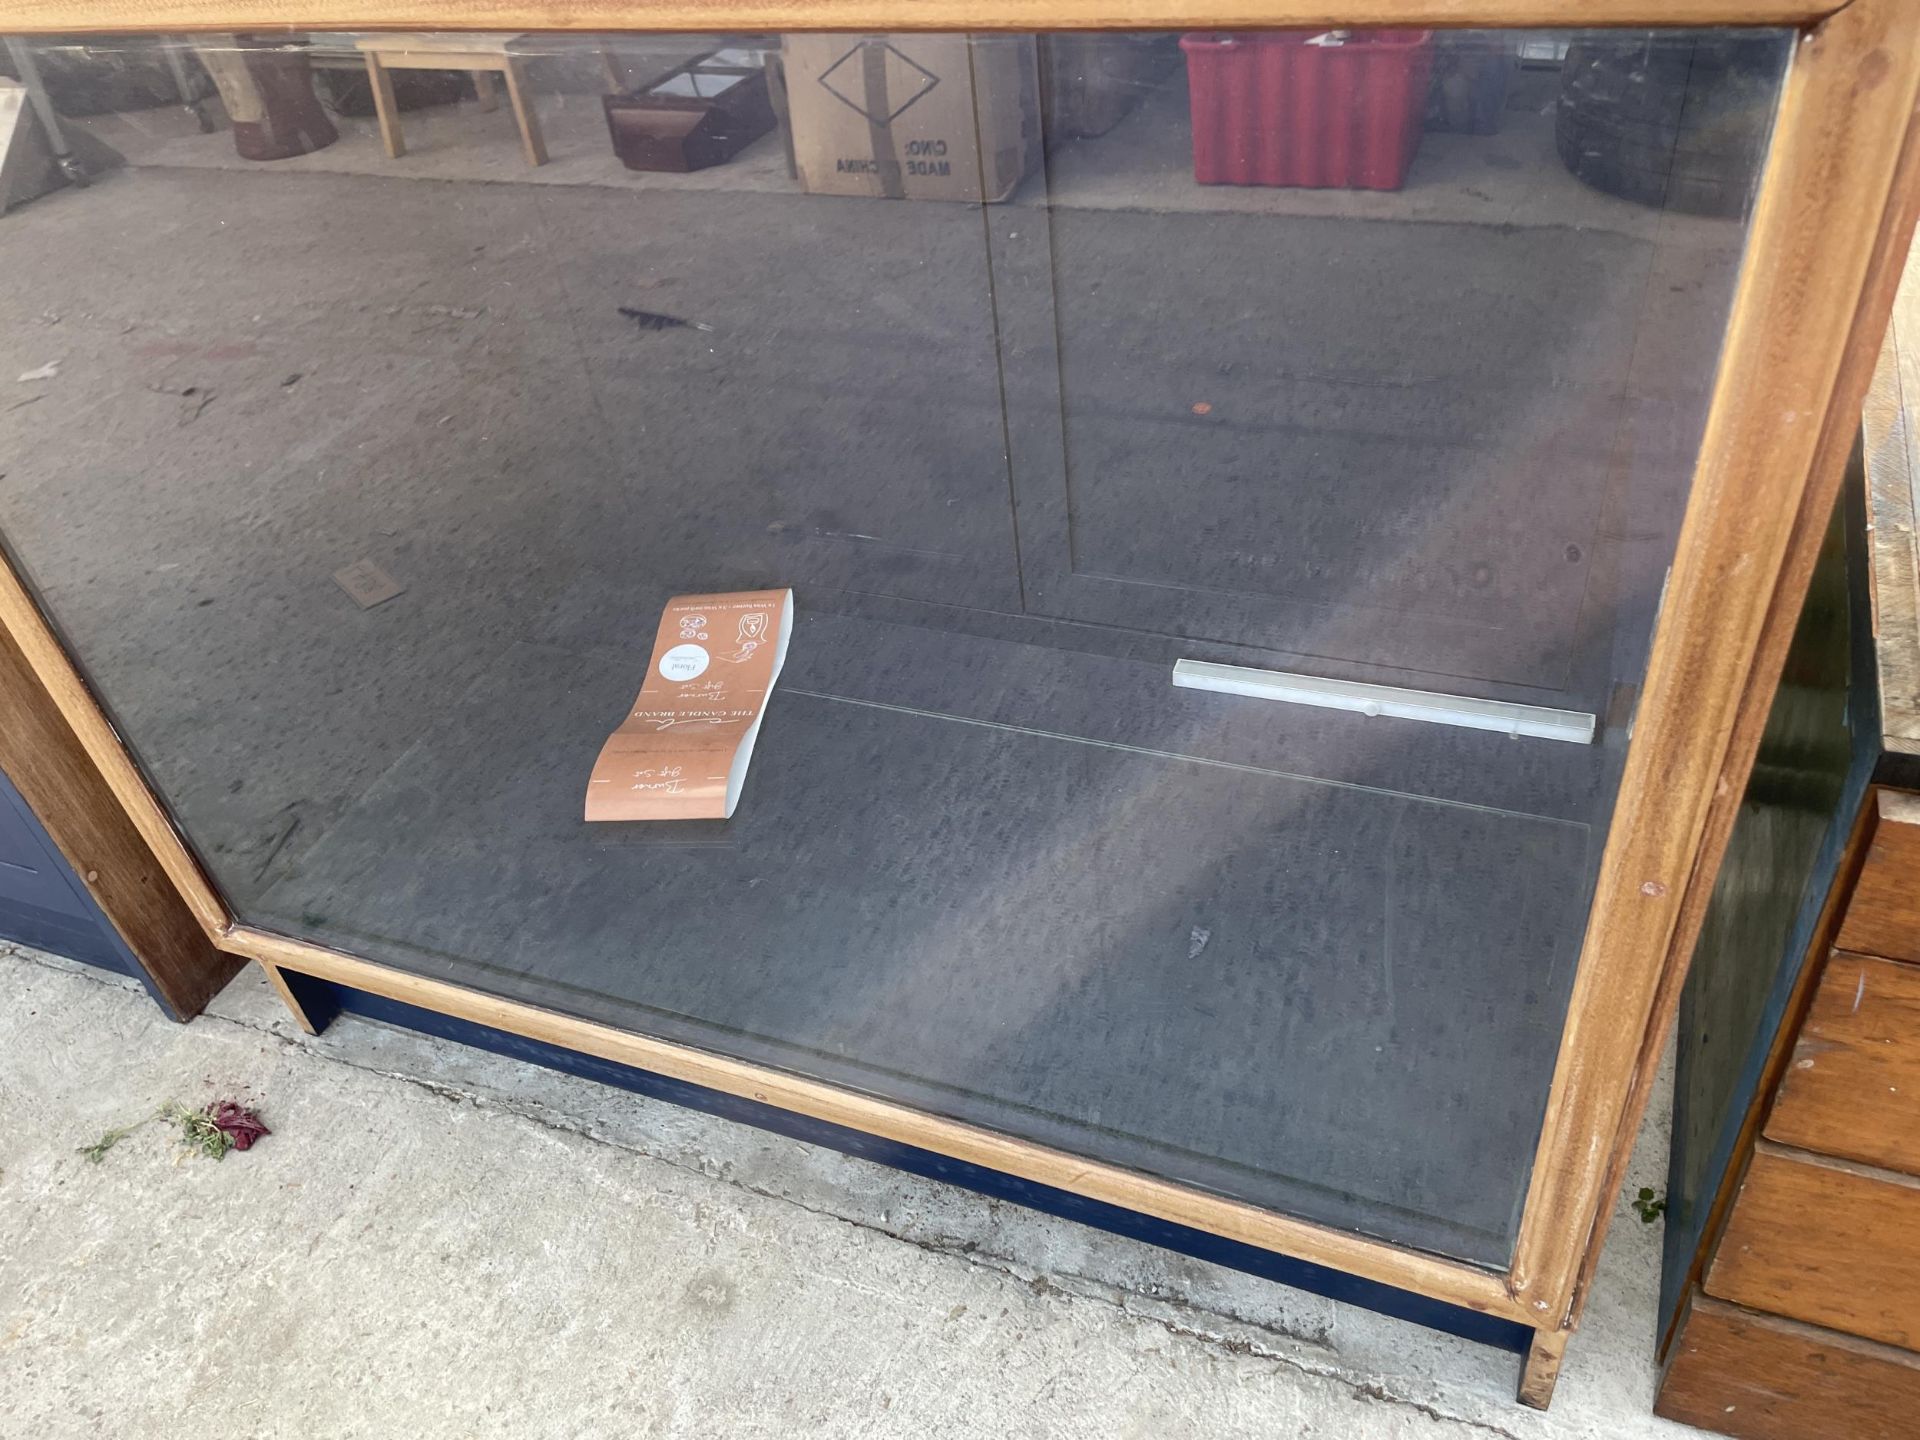 A VINTAGE GLASS FRONTED SHOP DISPLAY UNIT - Image 2 of 3